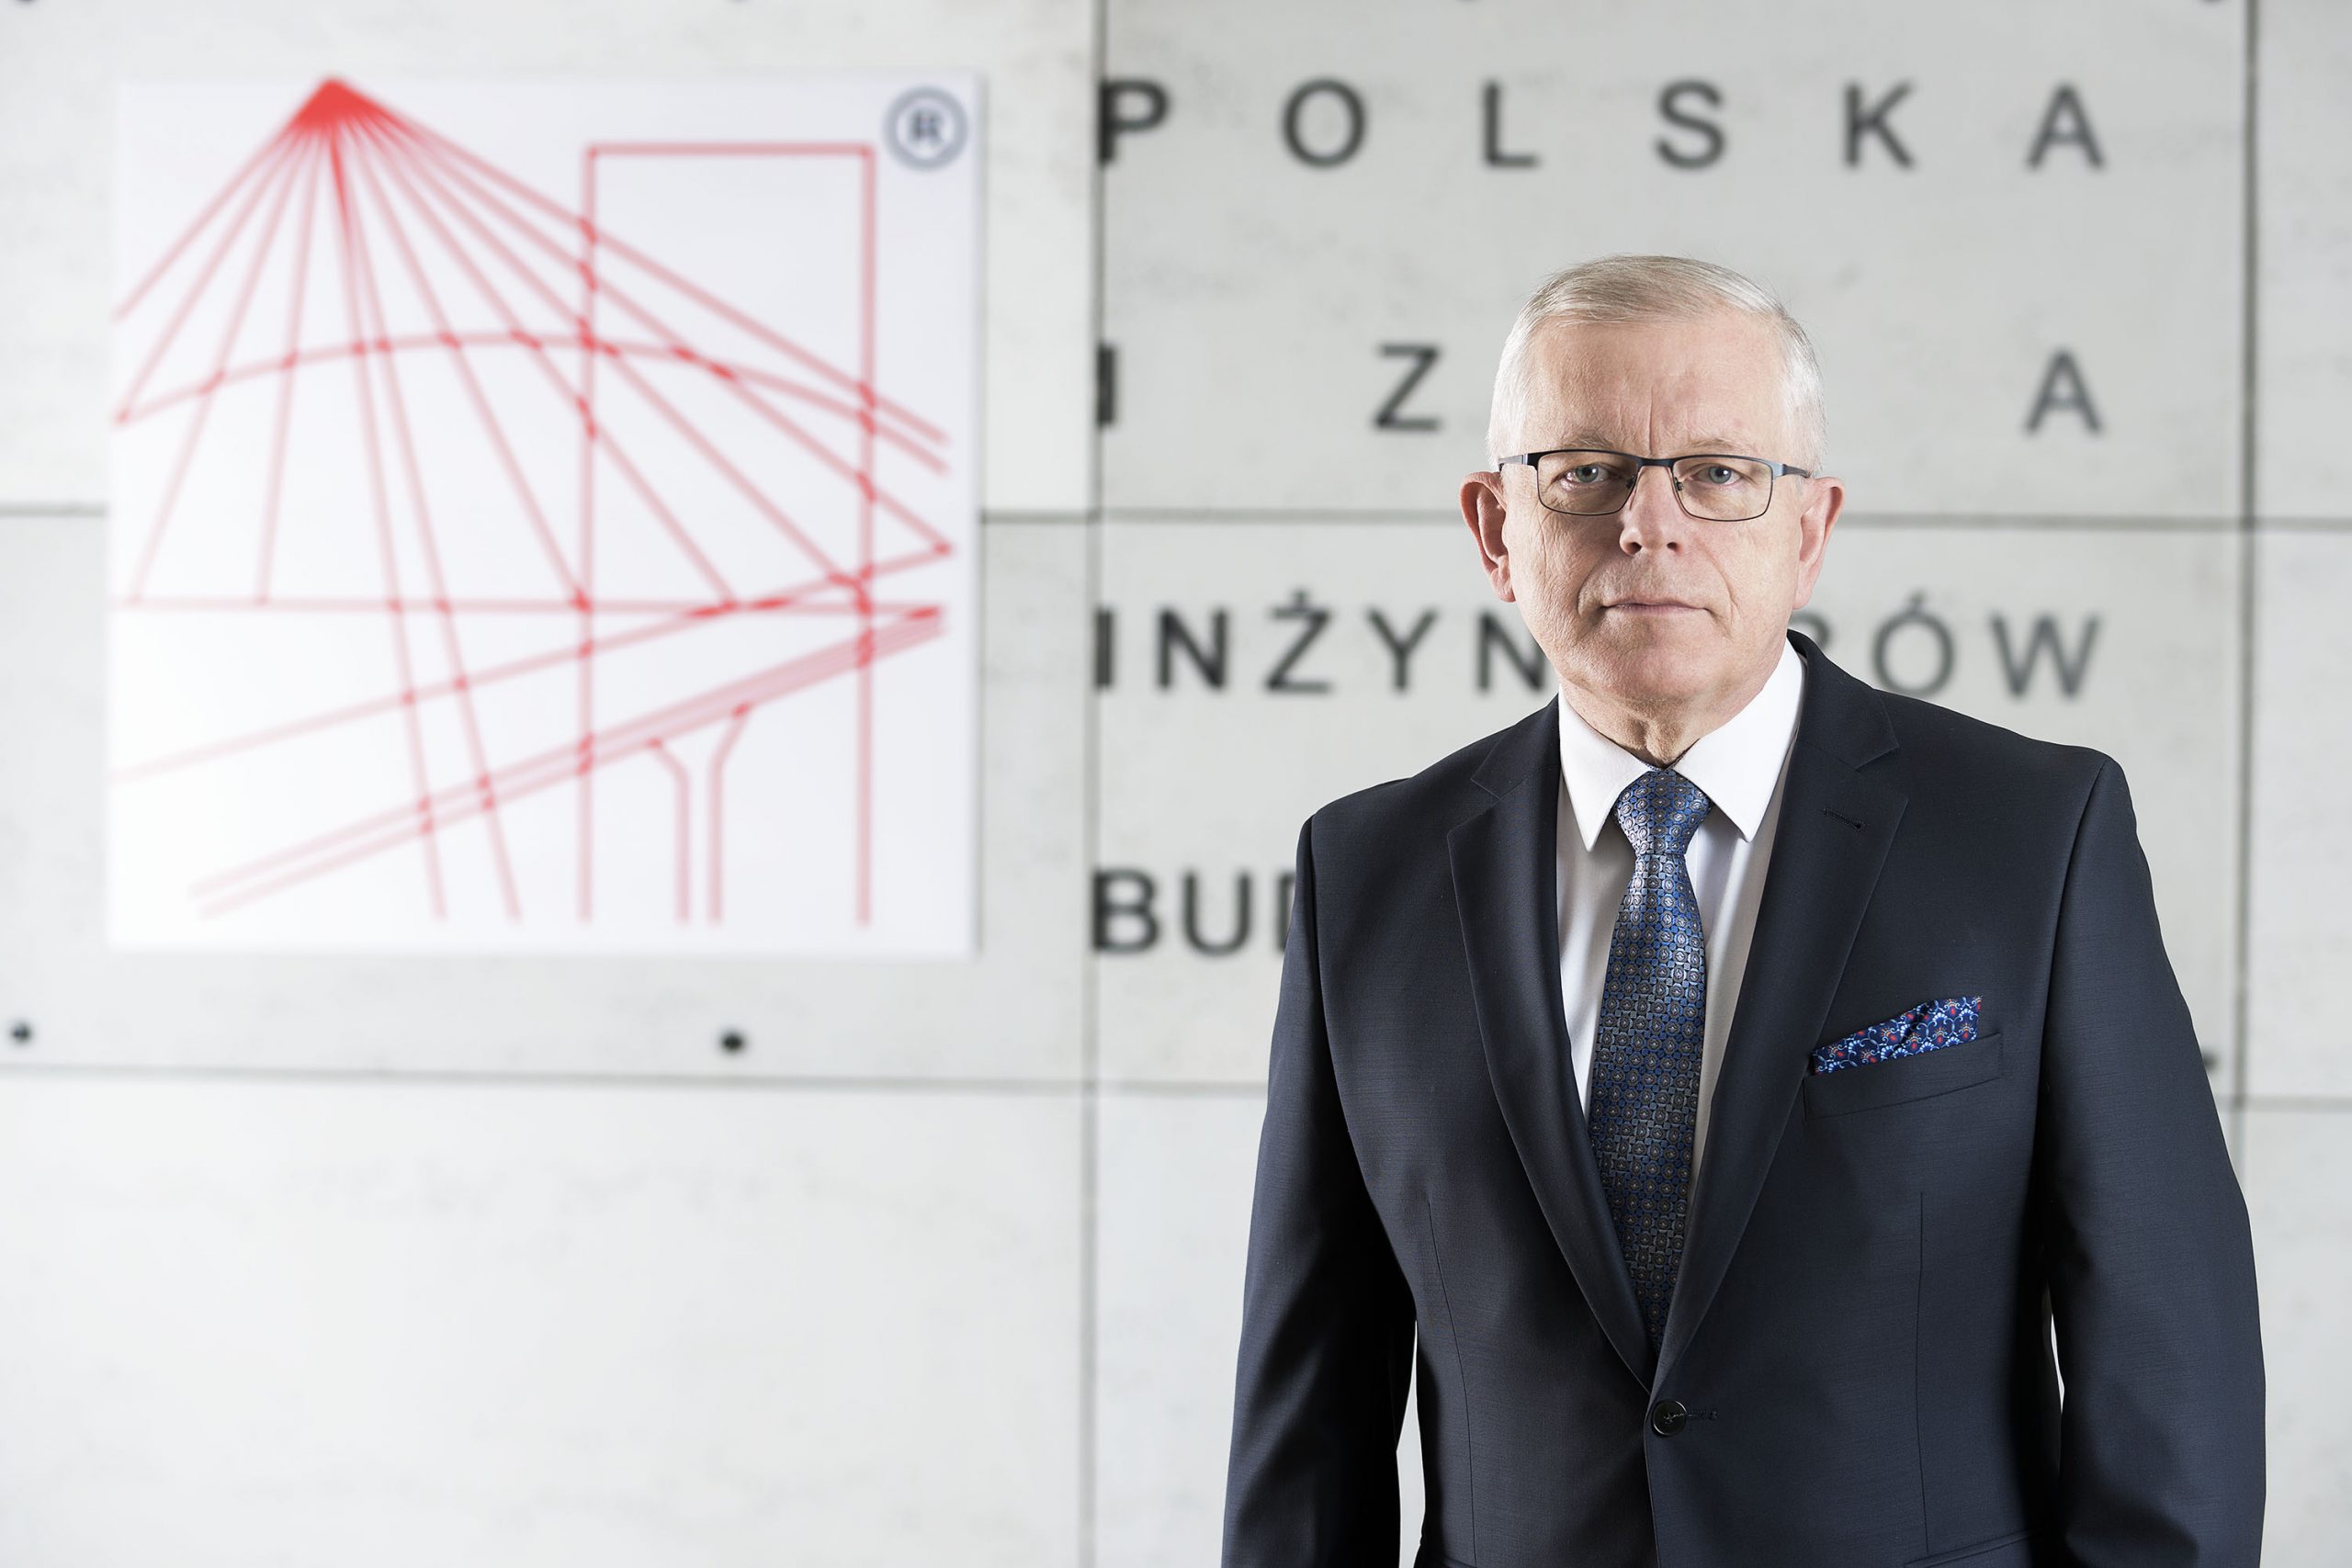 Technology and digitization – Interview with Prof. dr hab. inż. Zbigniew Kledyński, President of the Polish Chamber of Civil Engineers